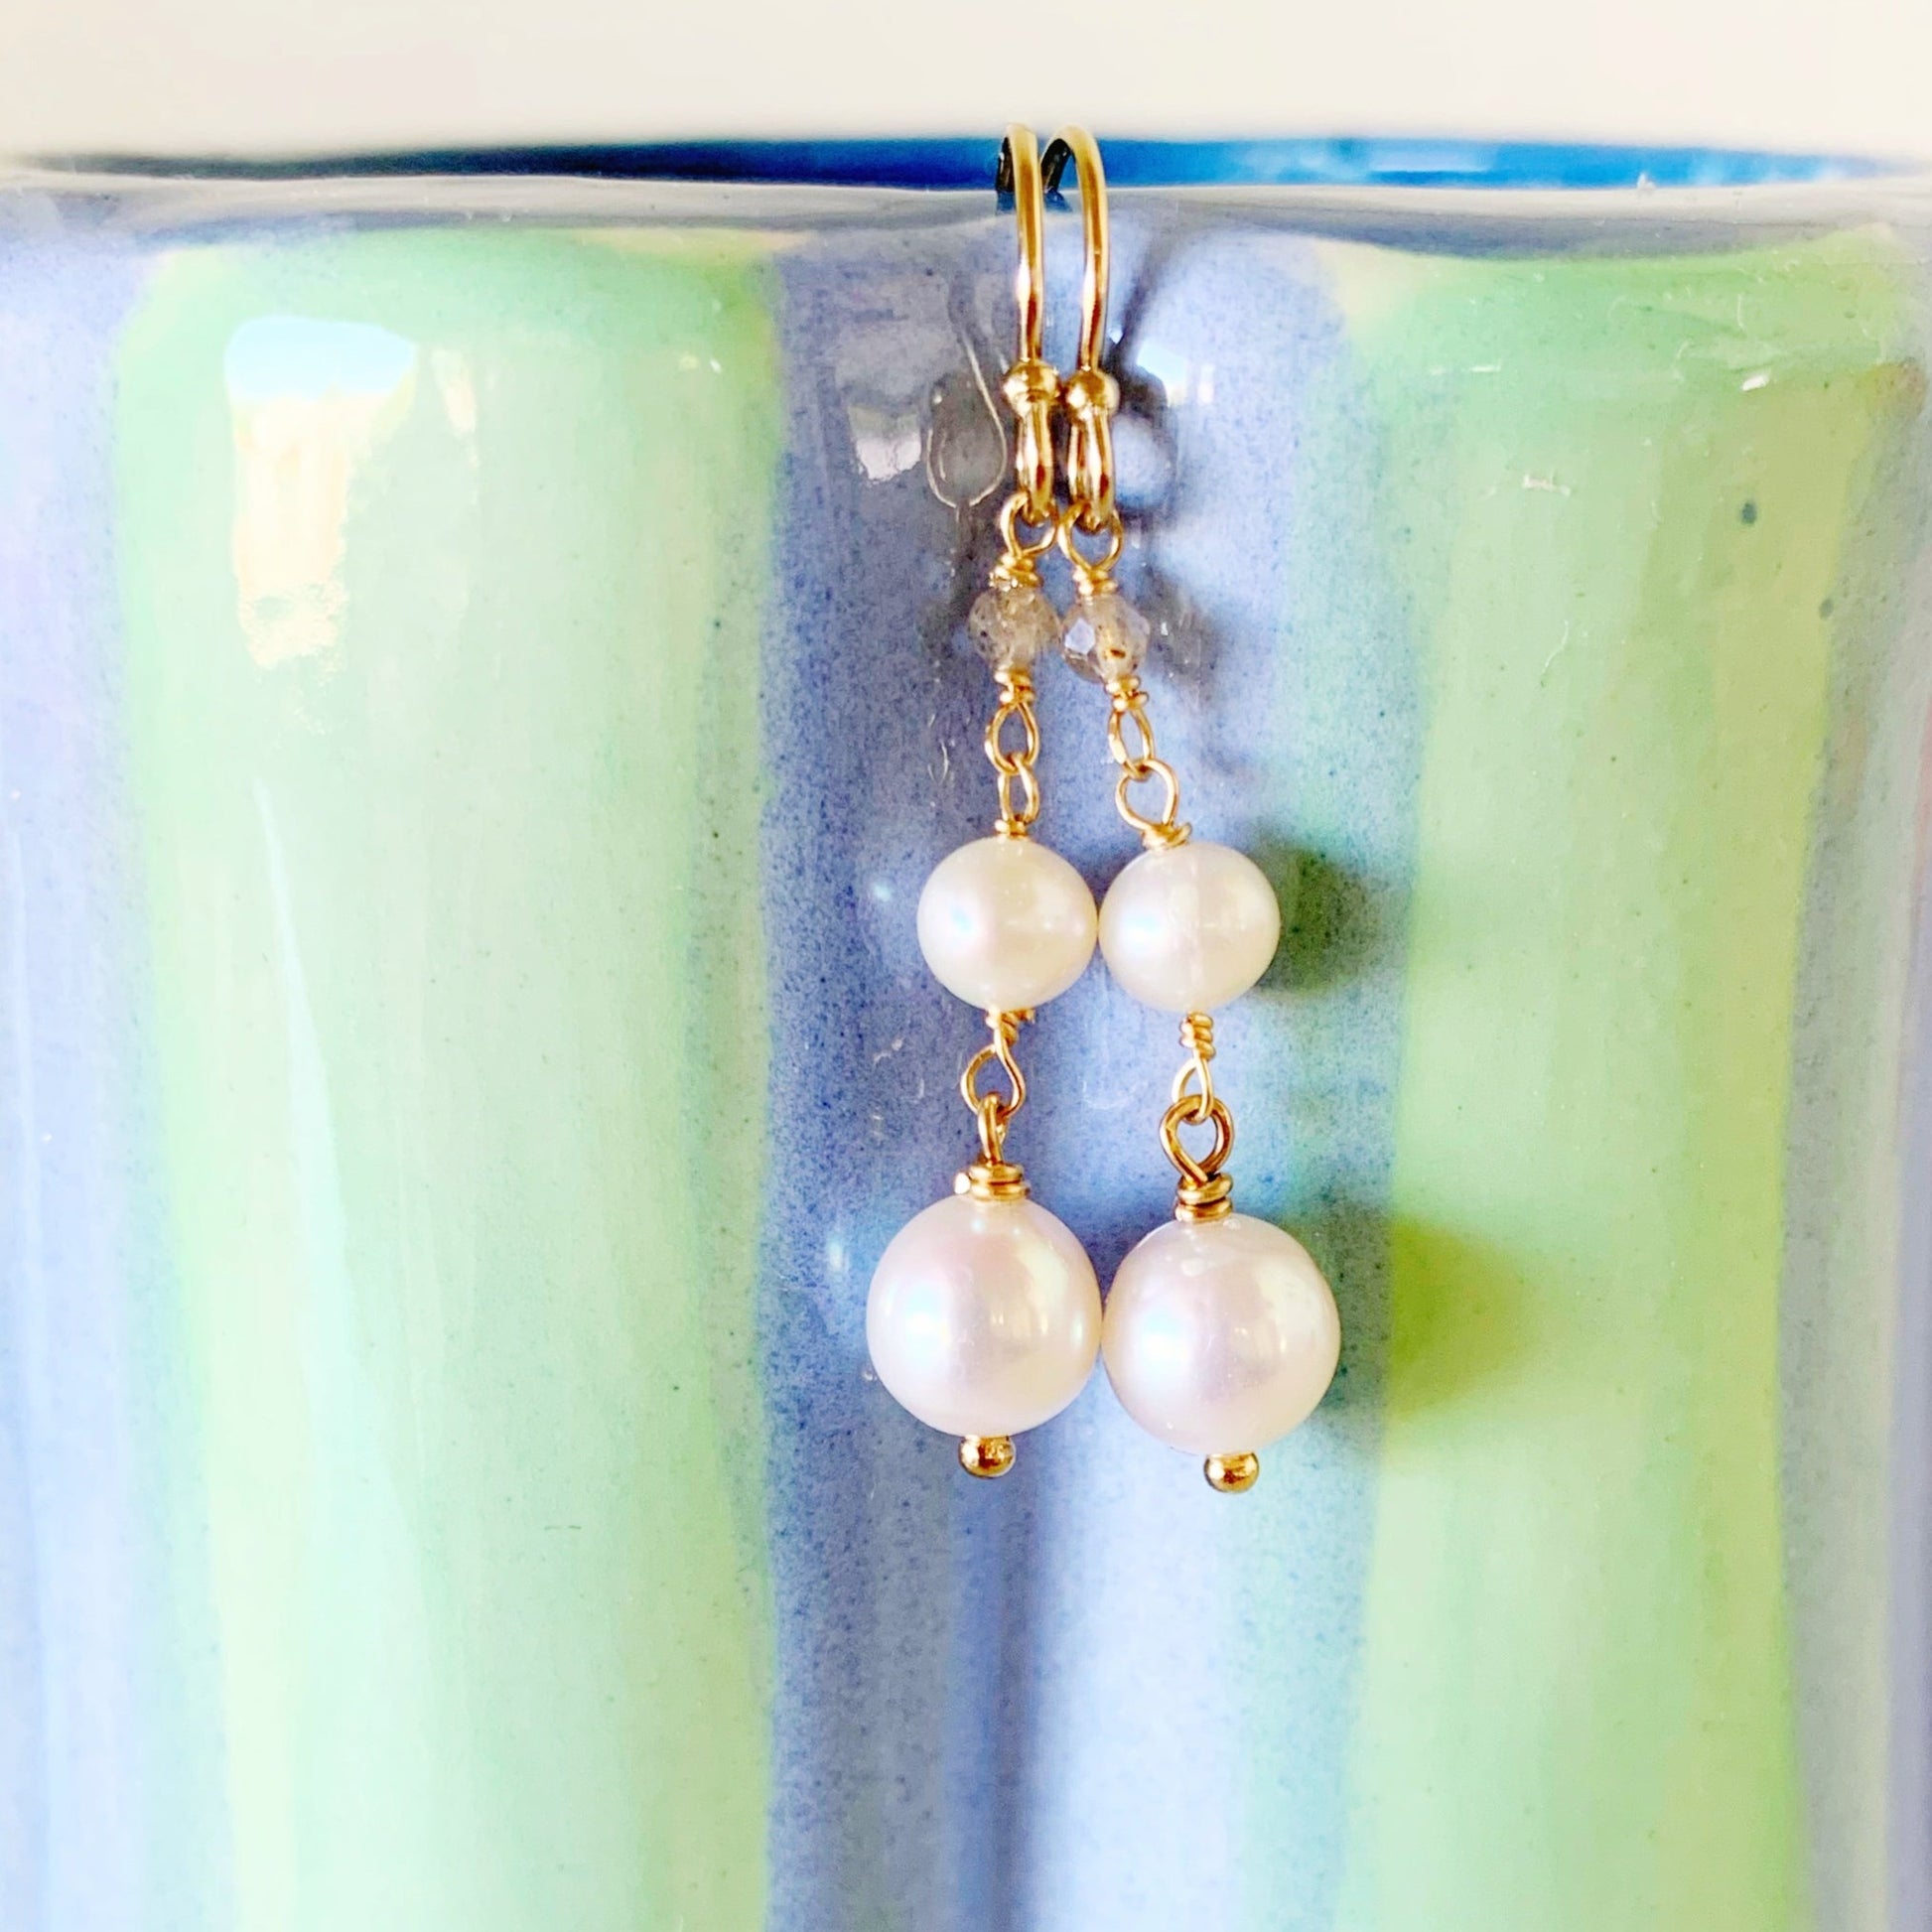 the westport earrings by mermaids and madeleines are handwrapped freshwater pearl ,tapered linear earrings available in sterling silver or 14k gold filled, and complimented by tiny microfaceted labradorite rondelles. this pair photographed has 14k gold filled wire and findings and is resting on a light blue and green jar.